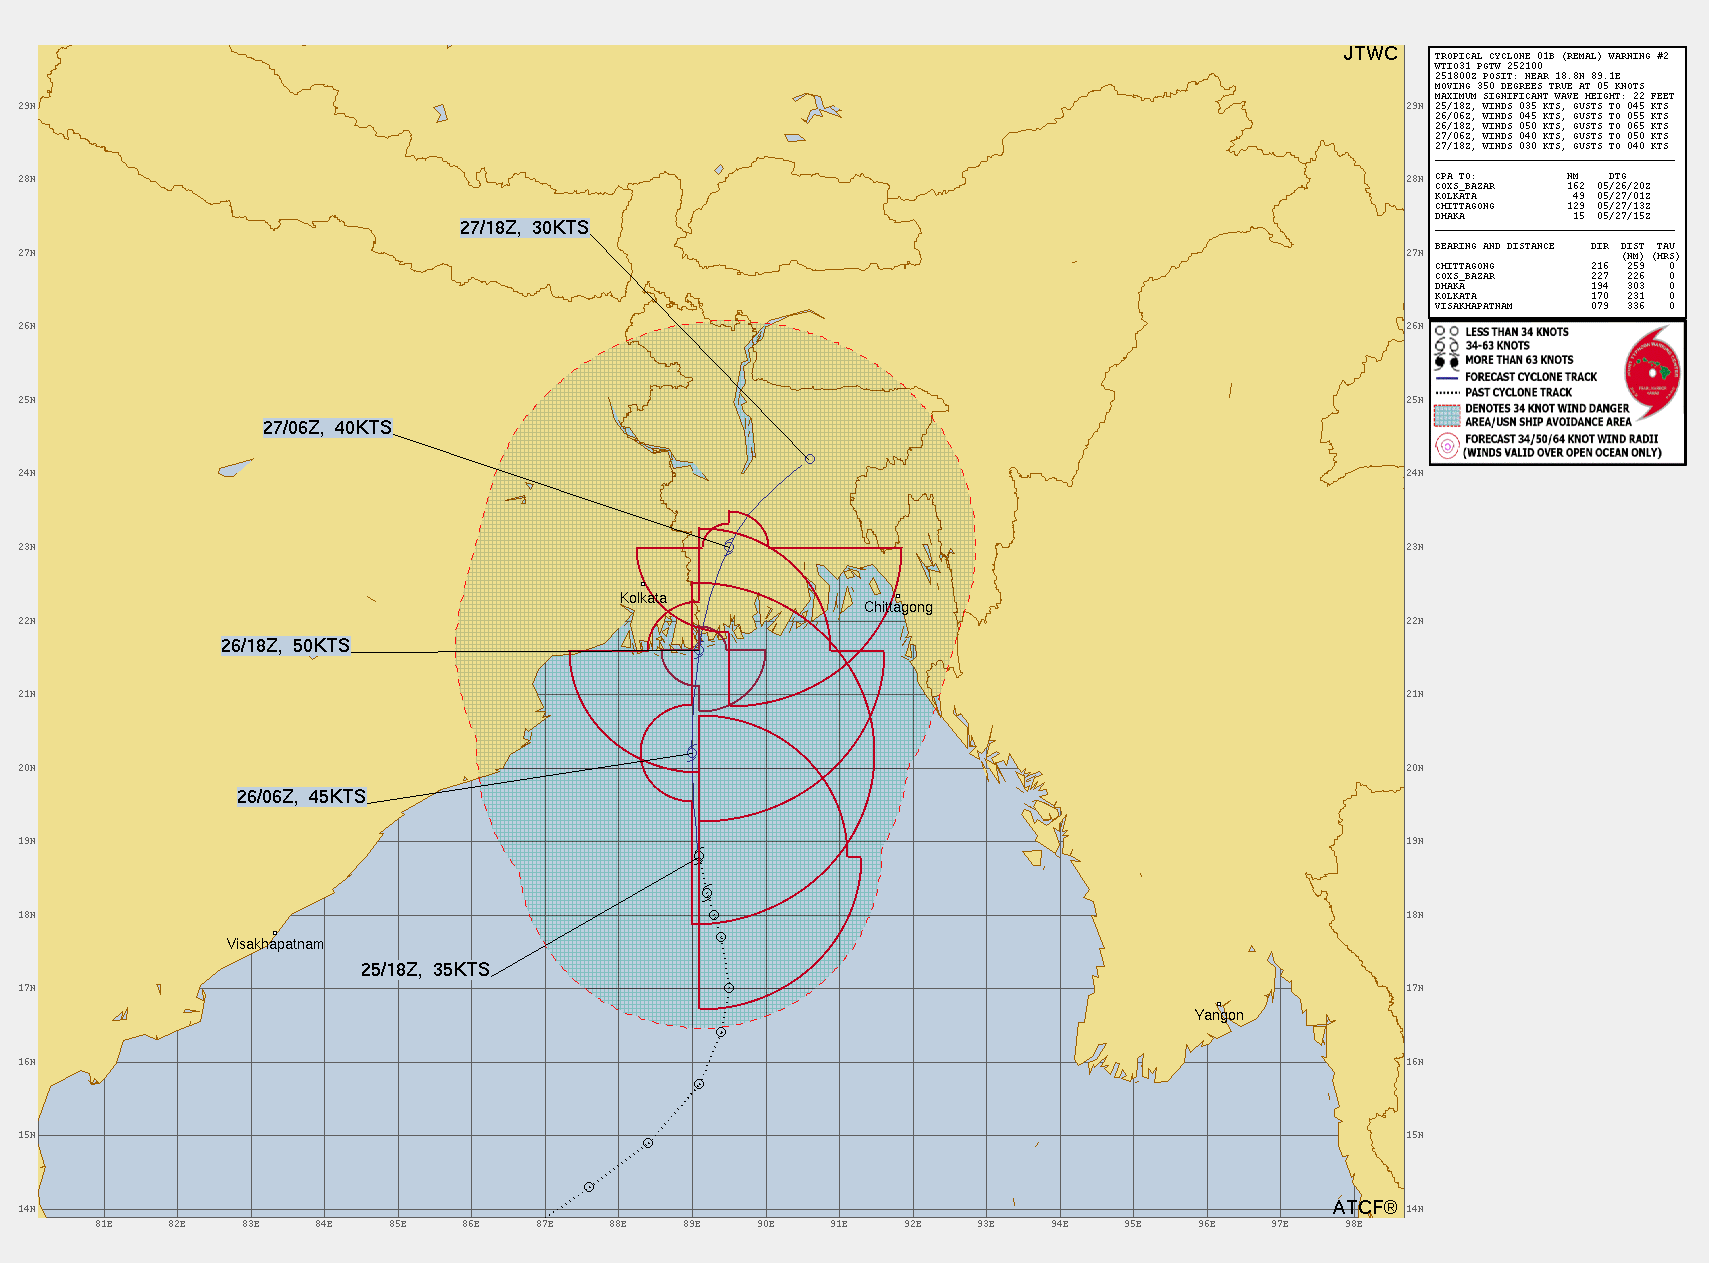 FORECAST REASONING.  SIGNIFICANT FORECAST CHANGES: THERE ARE NO SIGNIFICANT CHANGES TO THE FORECAST FROM THE PREVIOUS WARNING.  FORECAST DISCUSSION: TROPICAL CYCLONE (TC) 01B IS FORECAST TO TRACK NORTHWARD THROUGH TAU 24, MAKING LANDFALL NEAR THE BORDER REGION OF INDIA AND BANGLADESH AT TAU 24. DUE TO THE FAVORABLE ENVIRONMENTAL CONDITIONS, THE SYSTEM IS EXPECTED TO INTENSIFY STEADILY THROUGH TAU 24 WITH A PEAK INTENSITY OF 50 KNOTS AT TAU 24. THE SYSTEM WILL LIKELY REMAIN STRONG THROUGH TAU 30 AS IT TRACKS INLAND OVER THE WARM, WET DELTA REGION. AFTER TAU 30, THE SYSTEM WILL TURN NORTHEASTWARD ALONG THE NORTHWEST PERIPHERY OF THE STR WHILE RAPIDLY DISSIPATING. DUE TO THE BROAD NATURE OF THE SYSTEM, HEAVY RAINFALL AND THE STRONGEST WINDS ARE EXPECTED TO BE DISPLACED AWAY FROM THE CENTER.